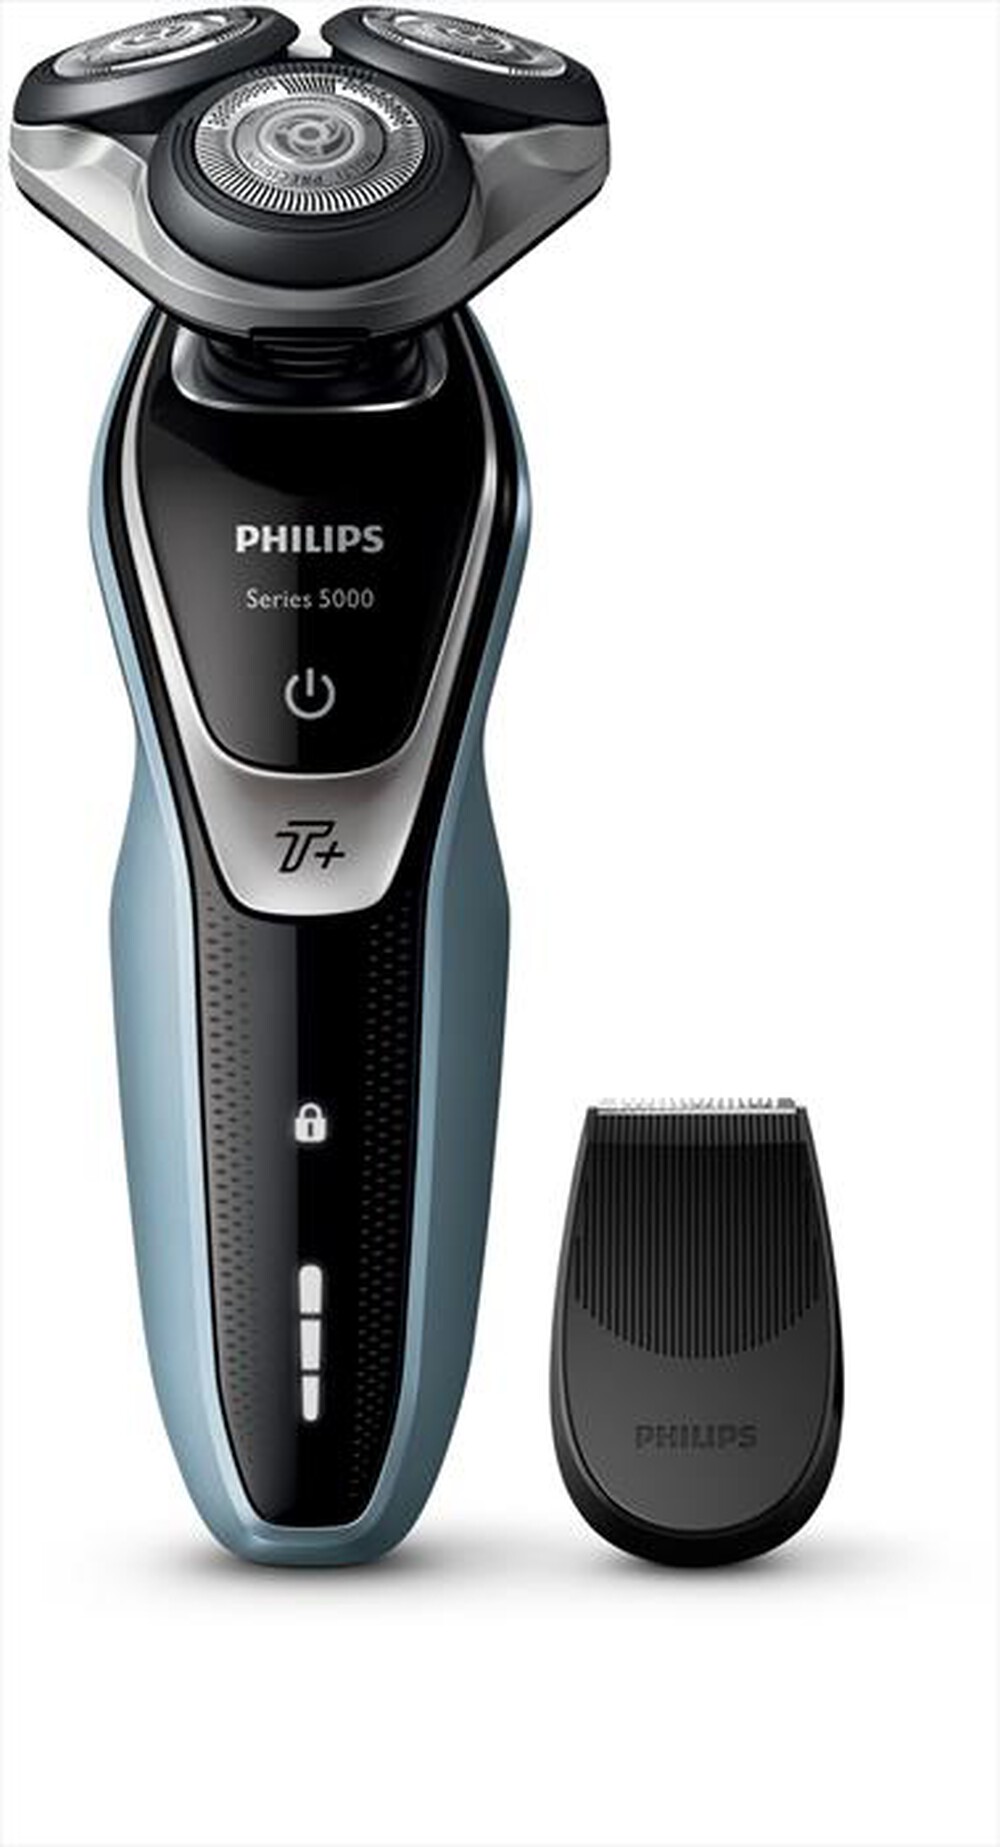 "PHILIPS - SHAVER SERIES 5000 S5530/08 - "